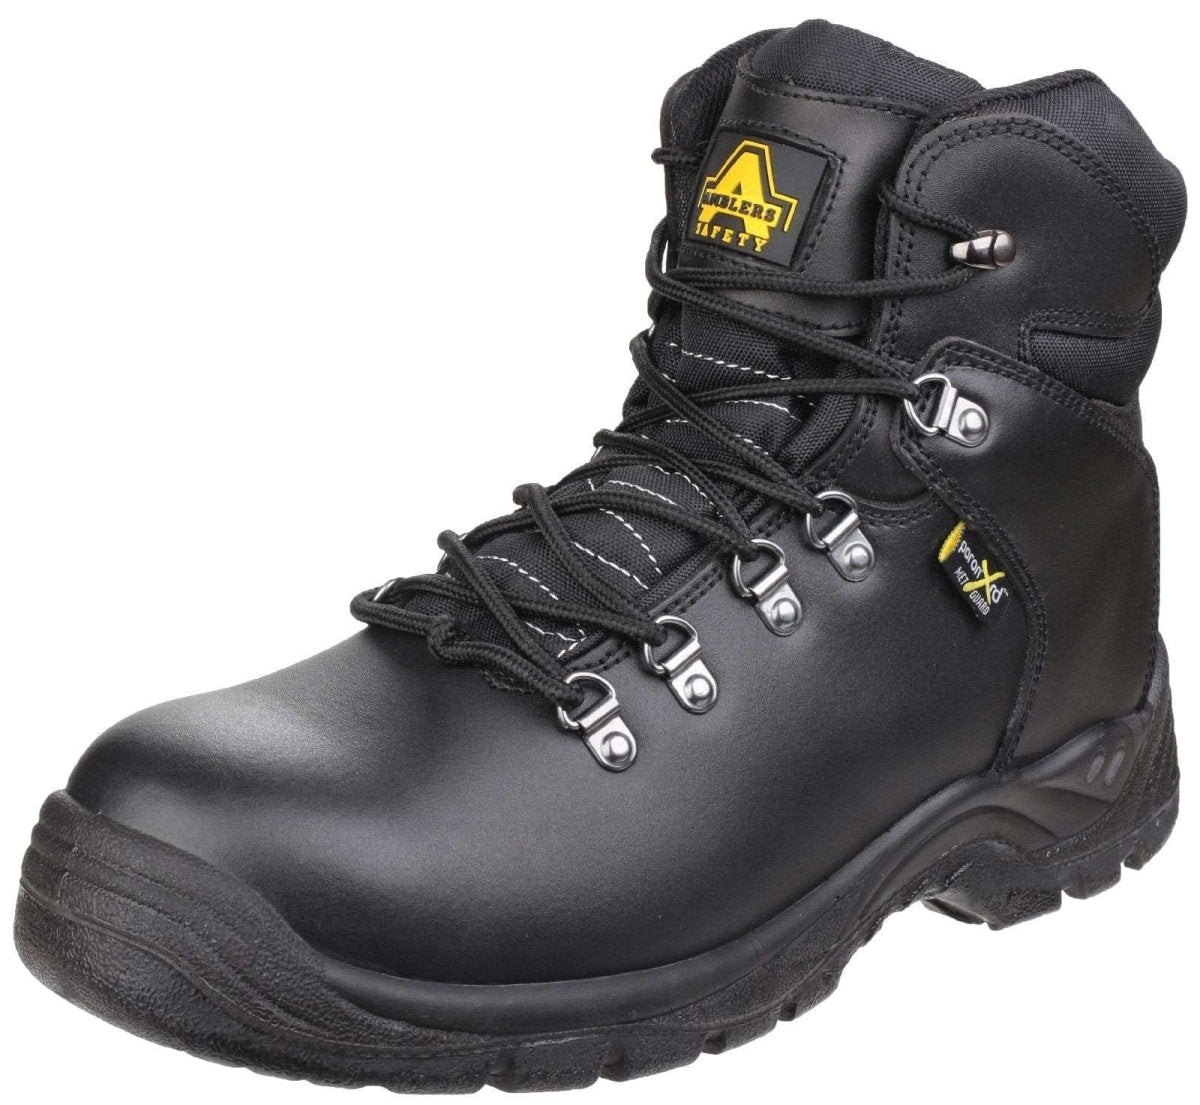 Amblers AS335 Poron XRD Internal Metatarsal Safety Boots - Shoe Store Direct